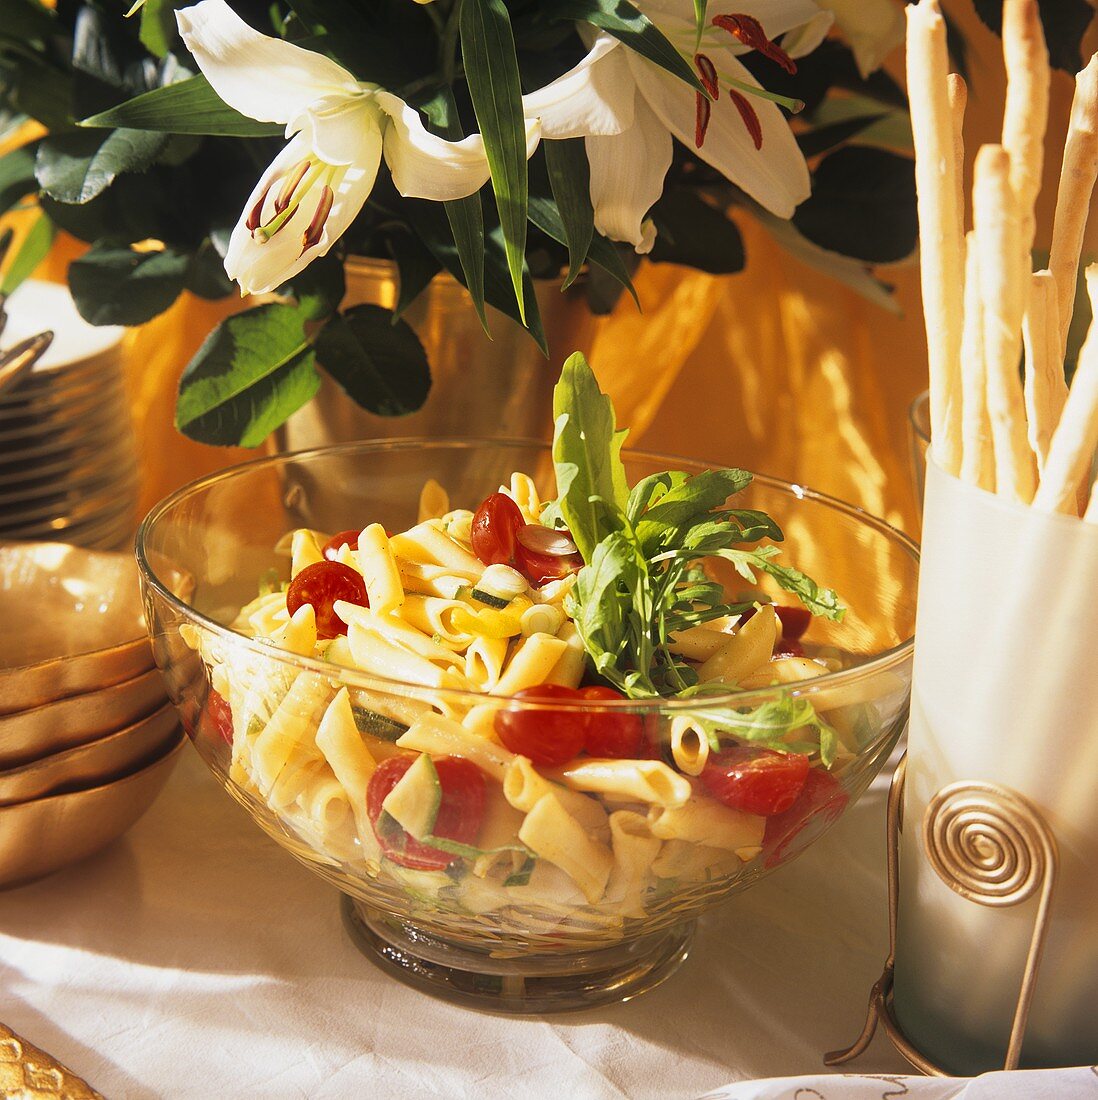 Pasta Salad and Grissini for a Buffet